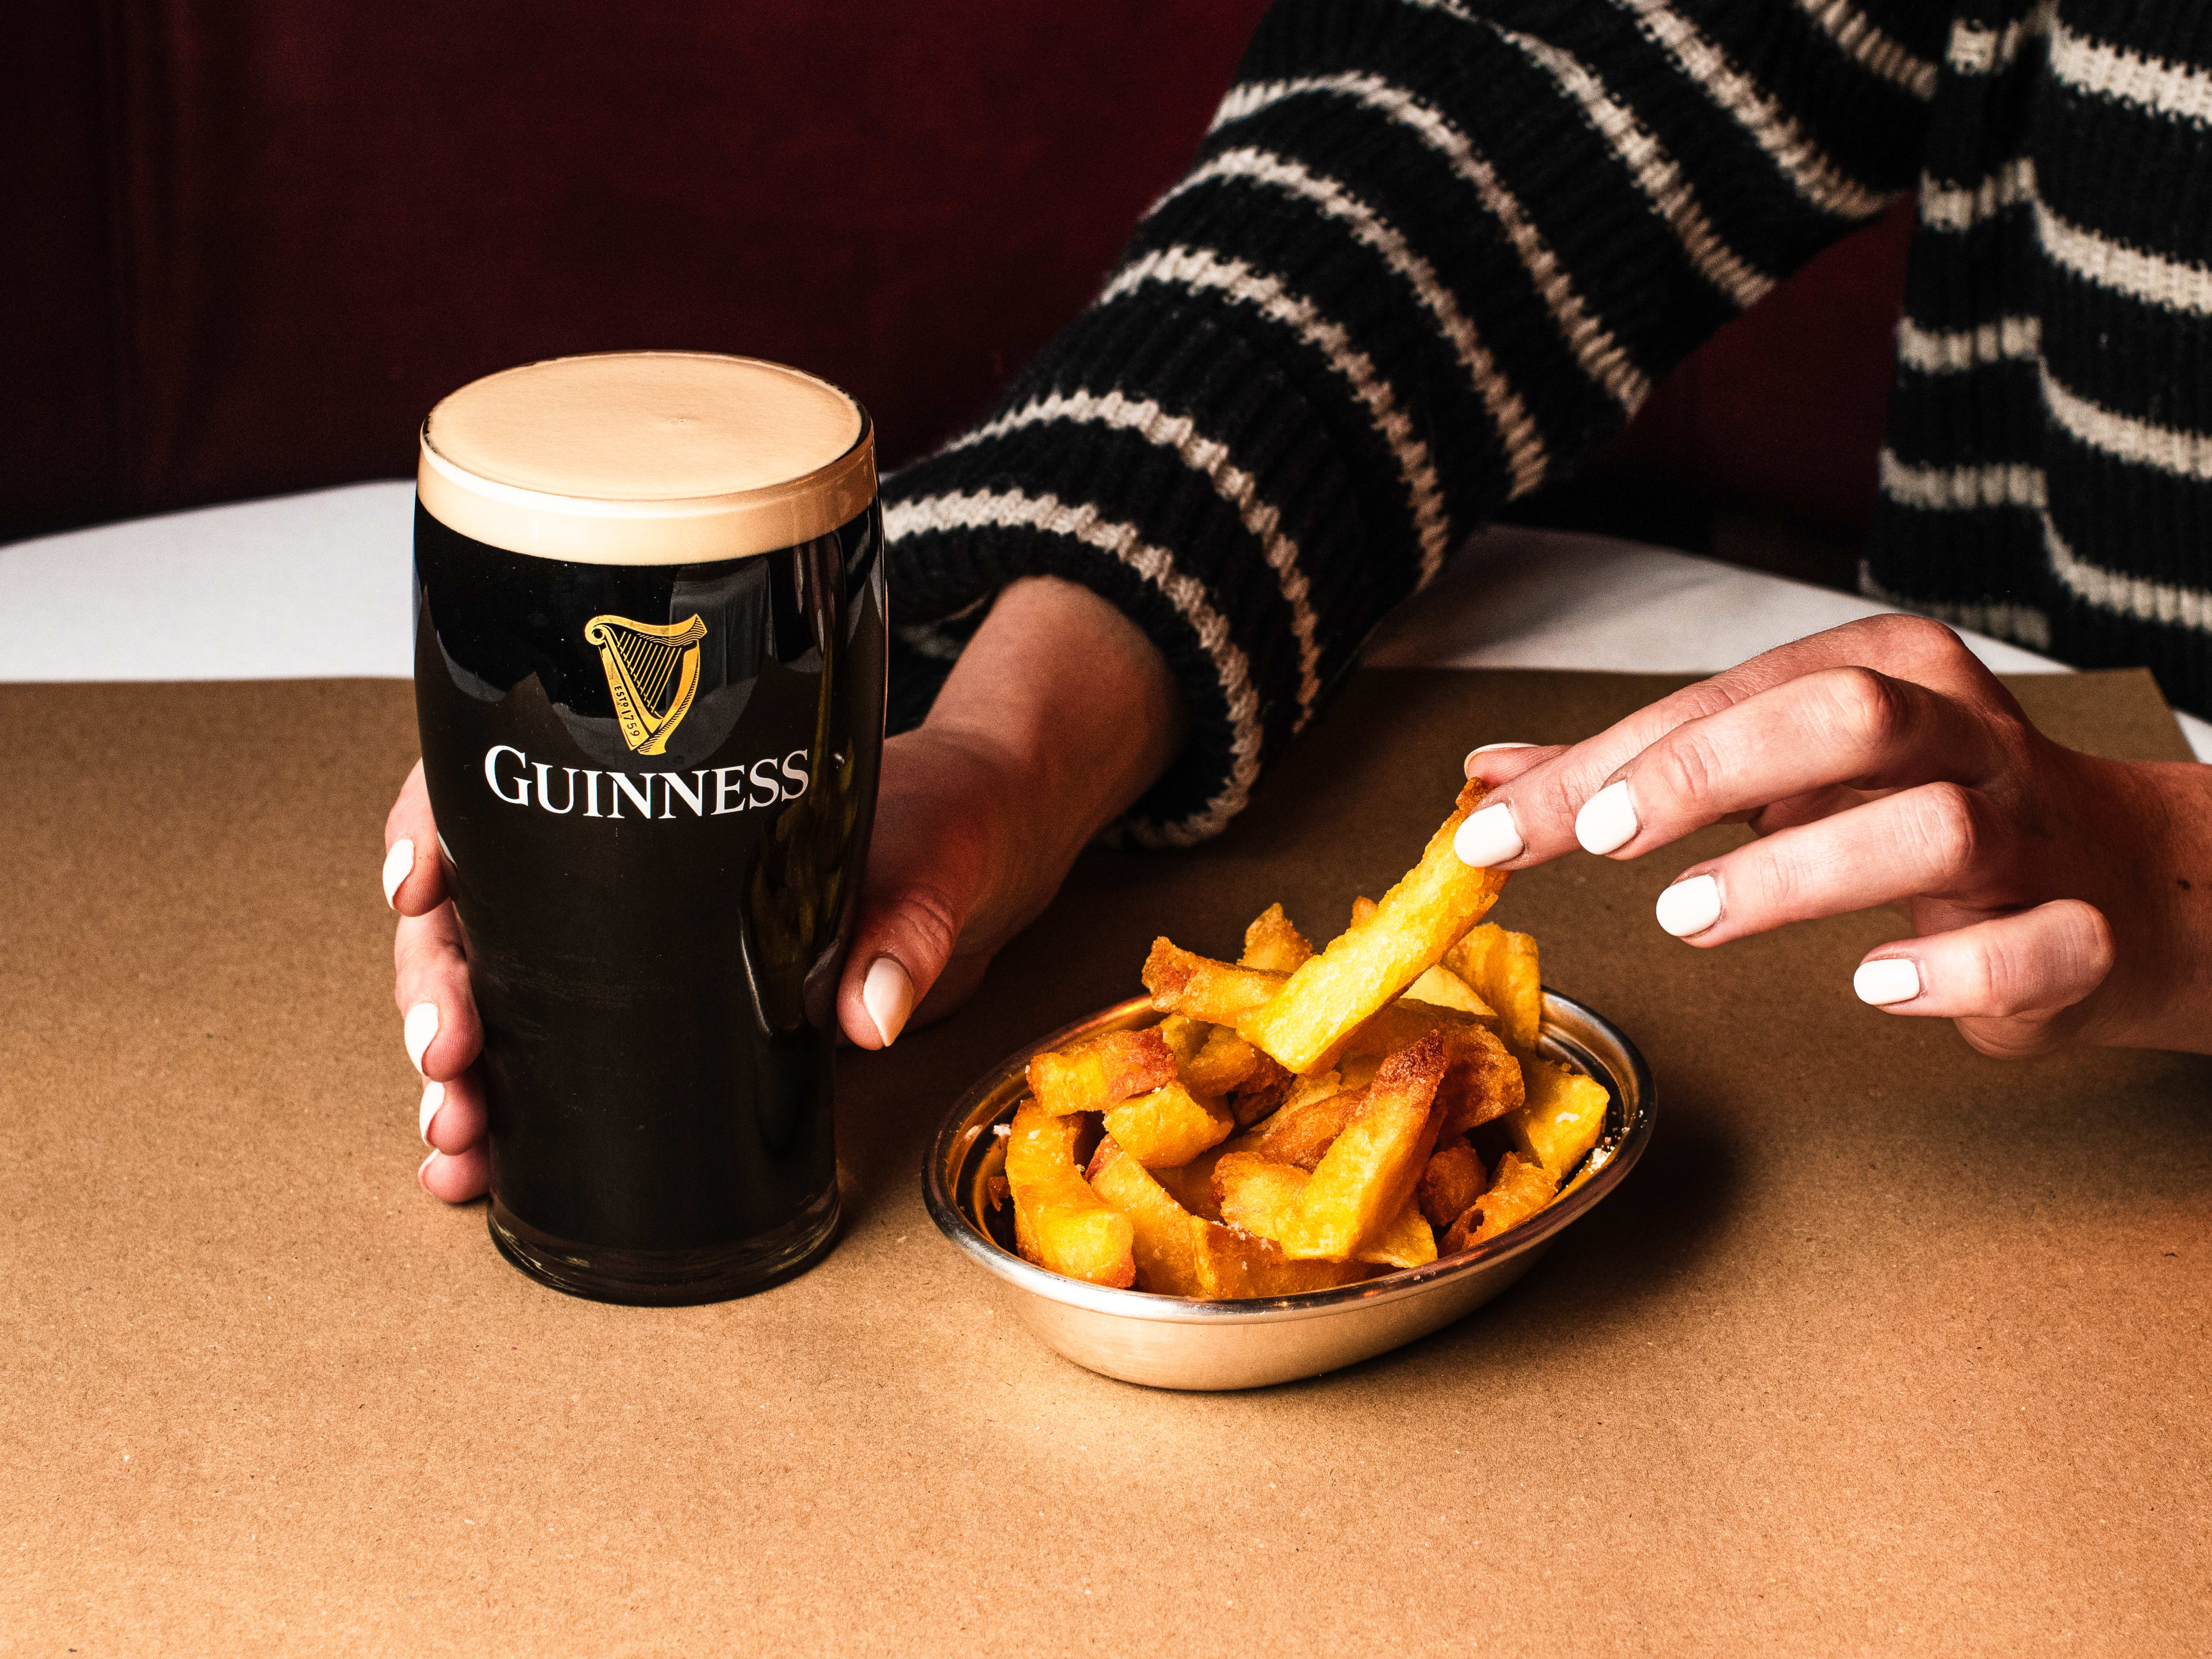 A woman's hand reaching for a chip with one hand and holding a pint of Guinness in the other.